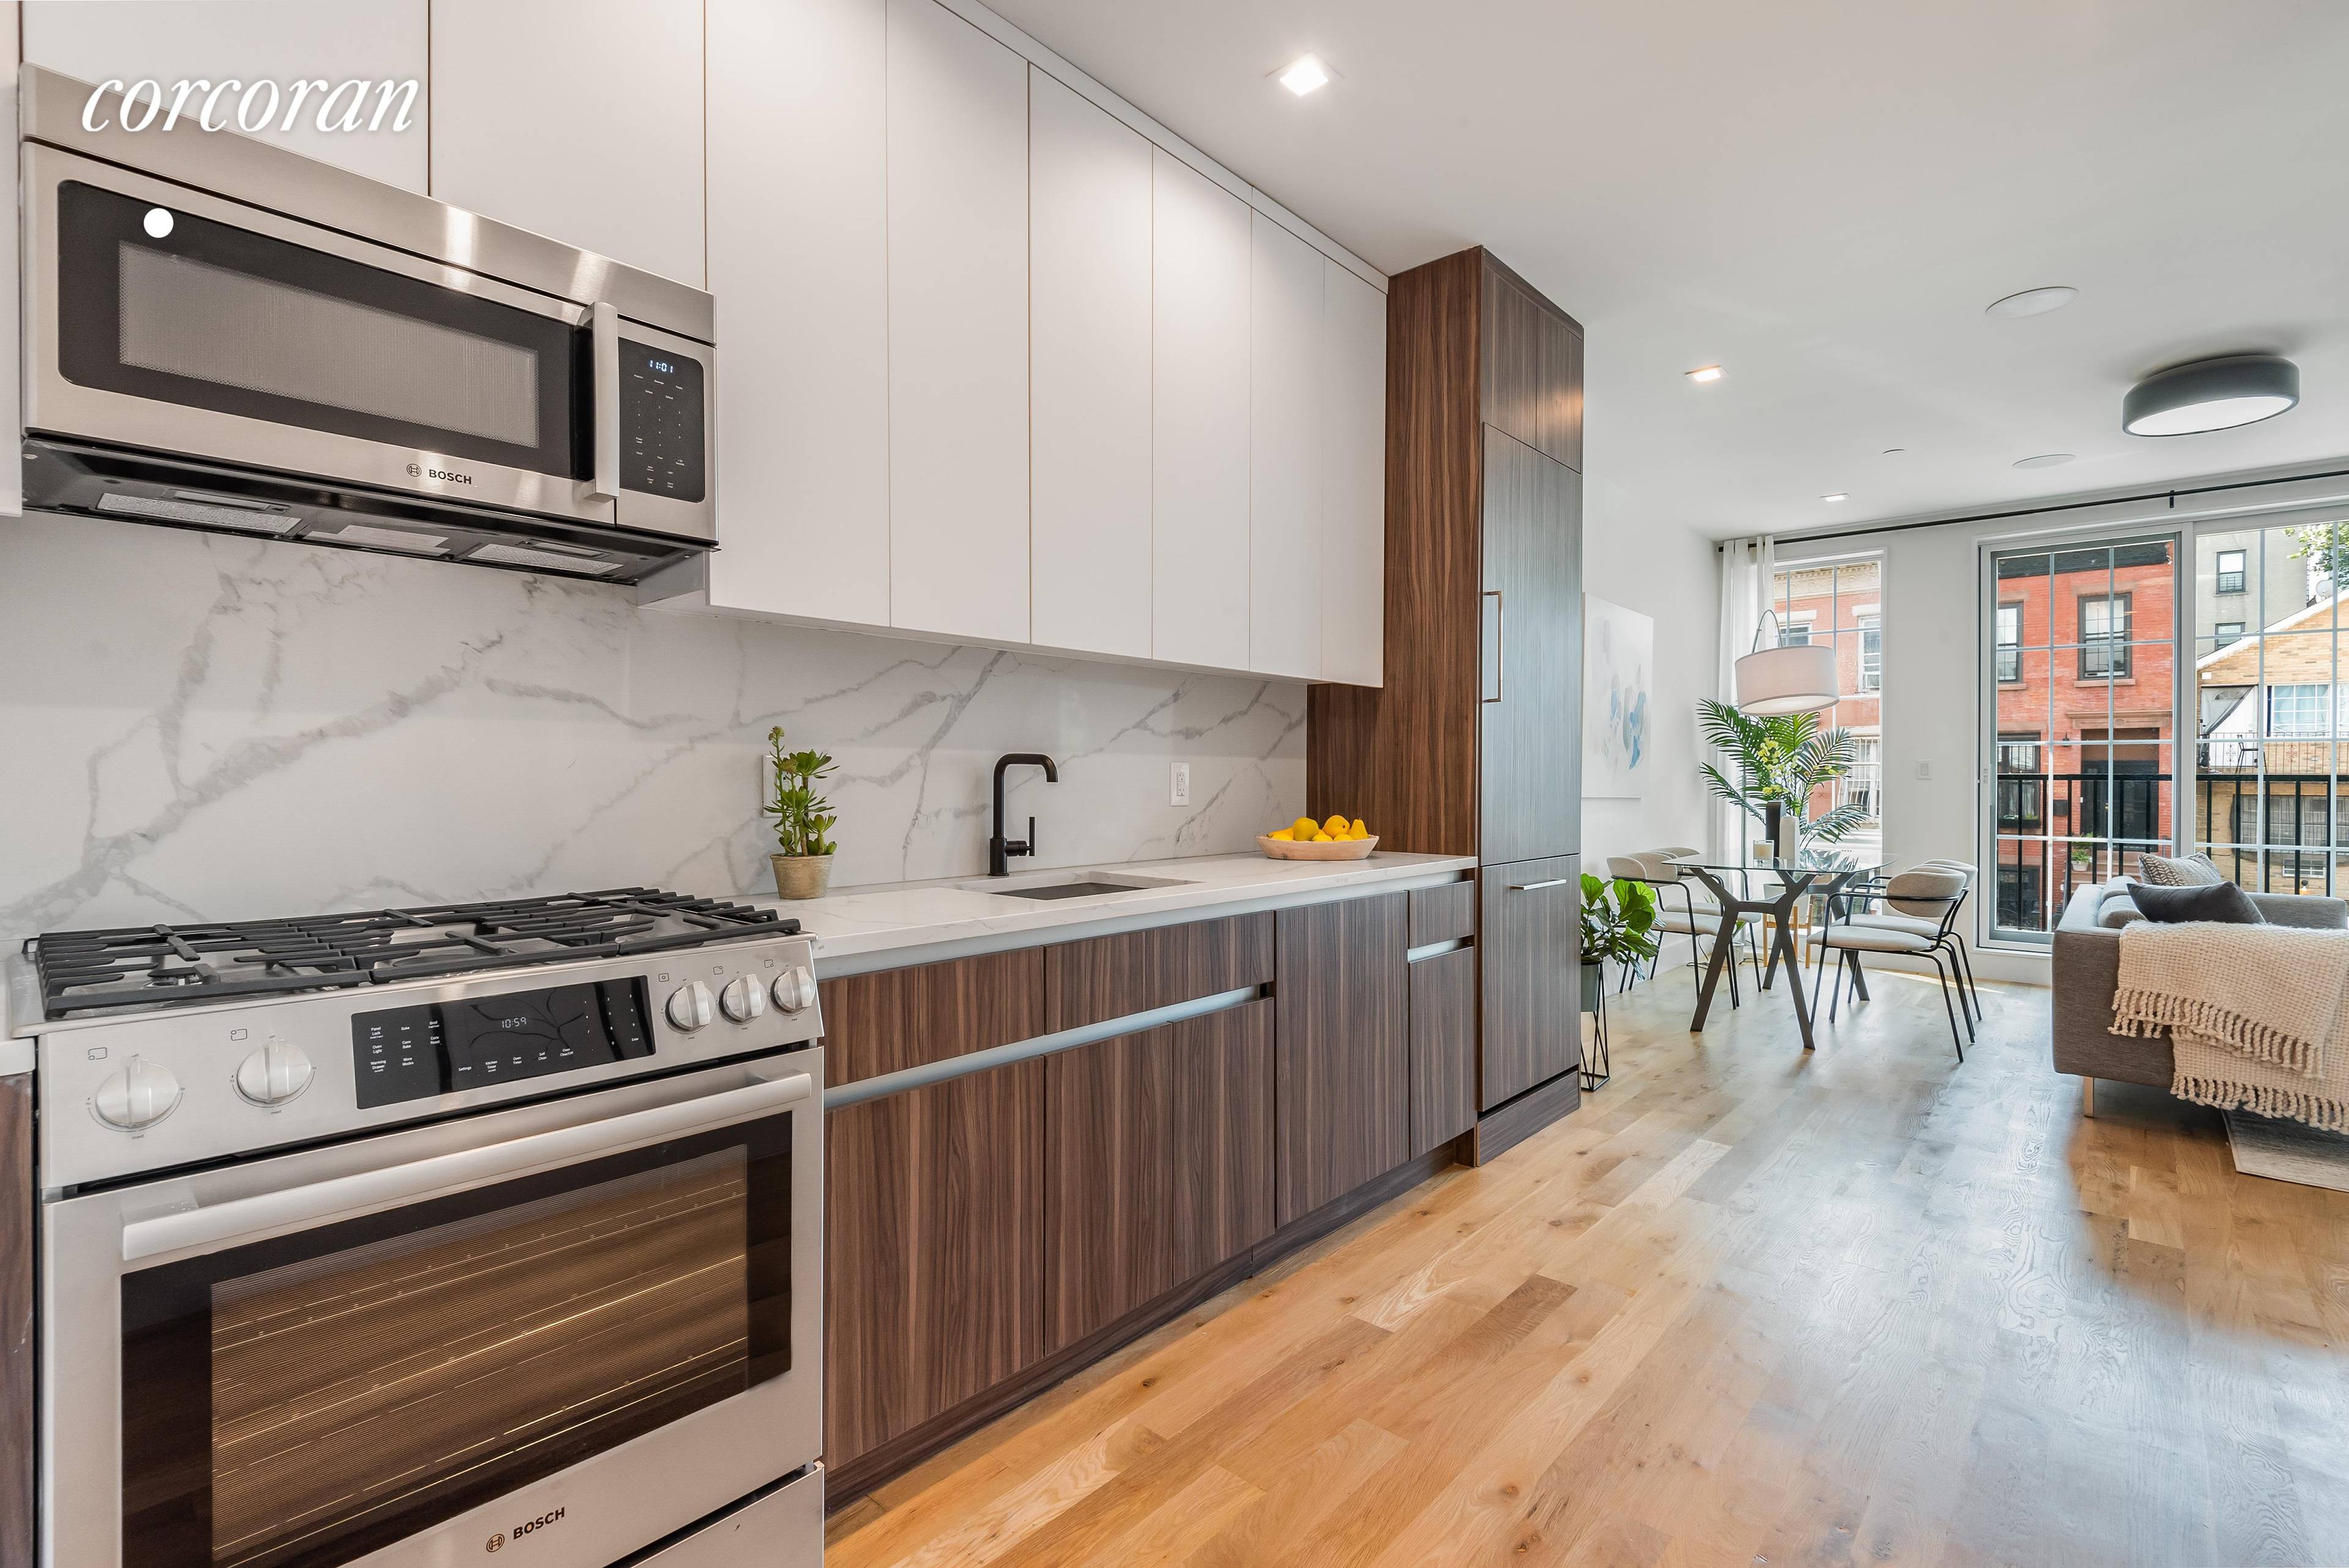 Welcome to 289 Kosciuszko Street, the newest boutique condominium in blossoming Bed Stuy, featuring 4 unique homes that have all been created with care and attention to detail.